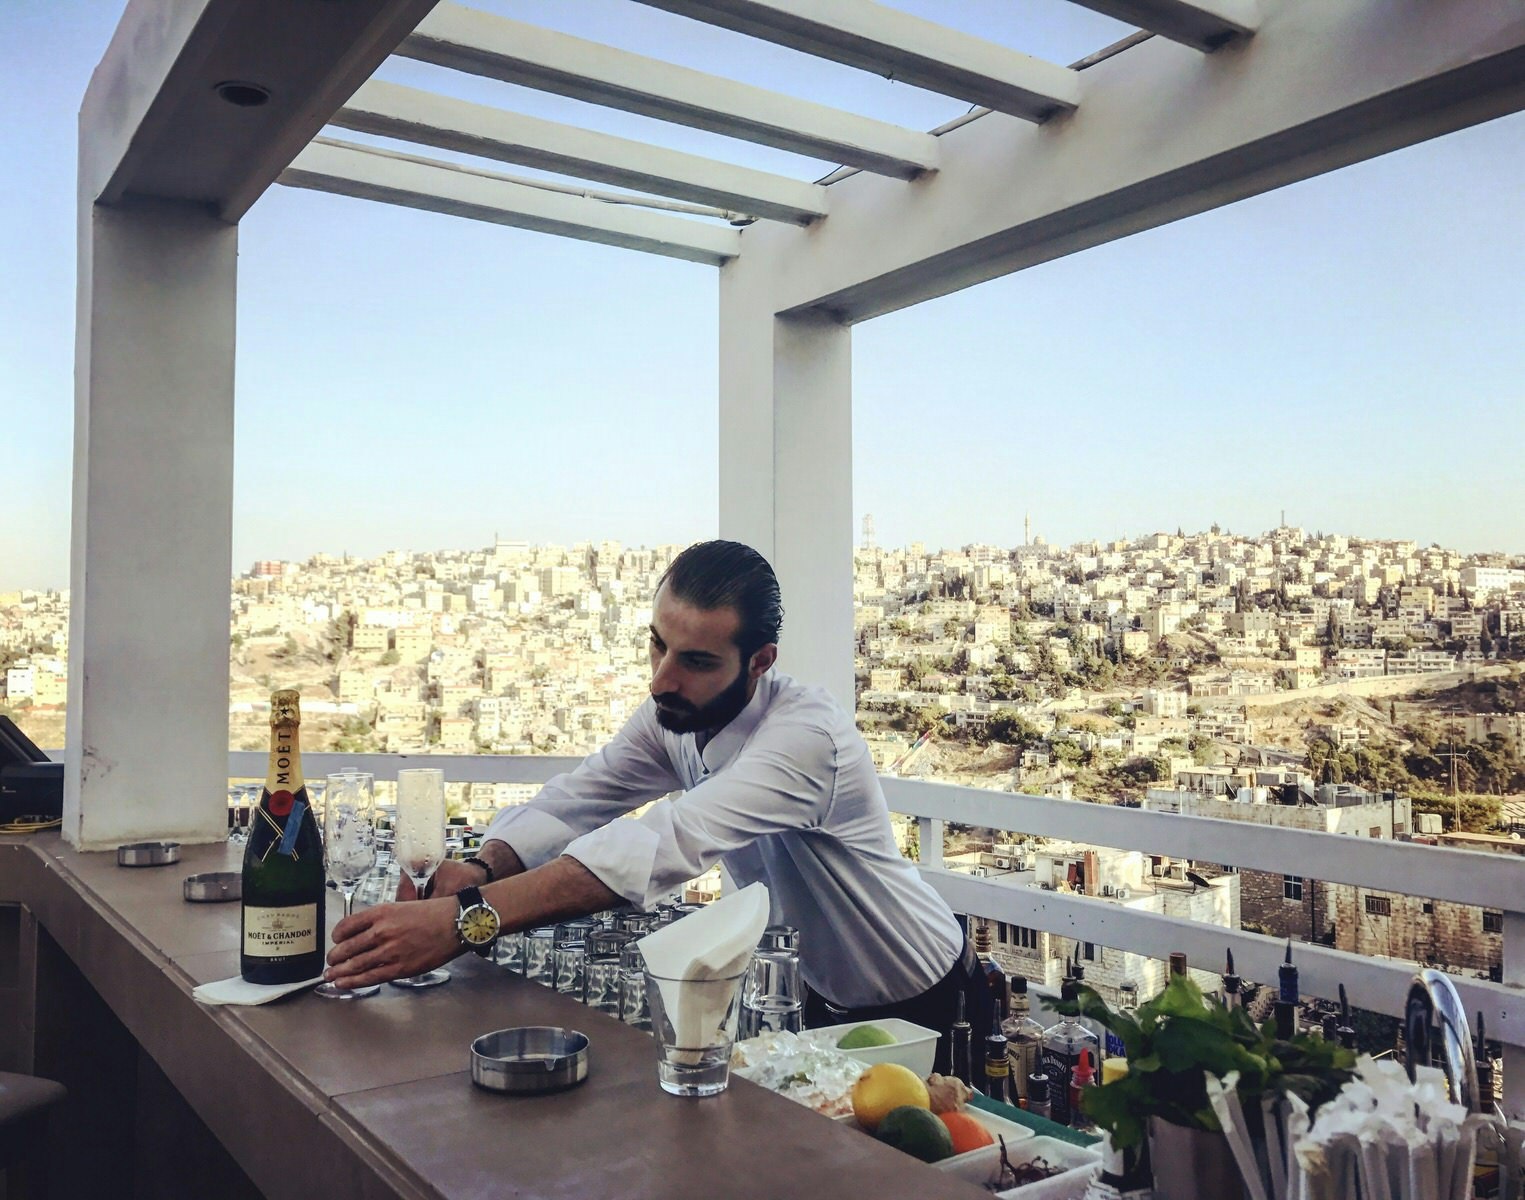 Bartender serves champagne at Cantaloupe in Amman. Image by Sunny Fitzgerald / Lonely Planet